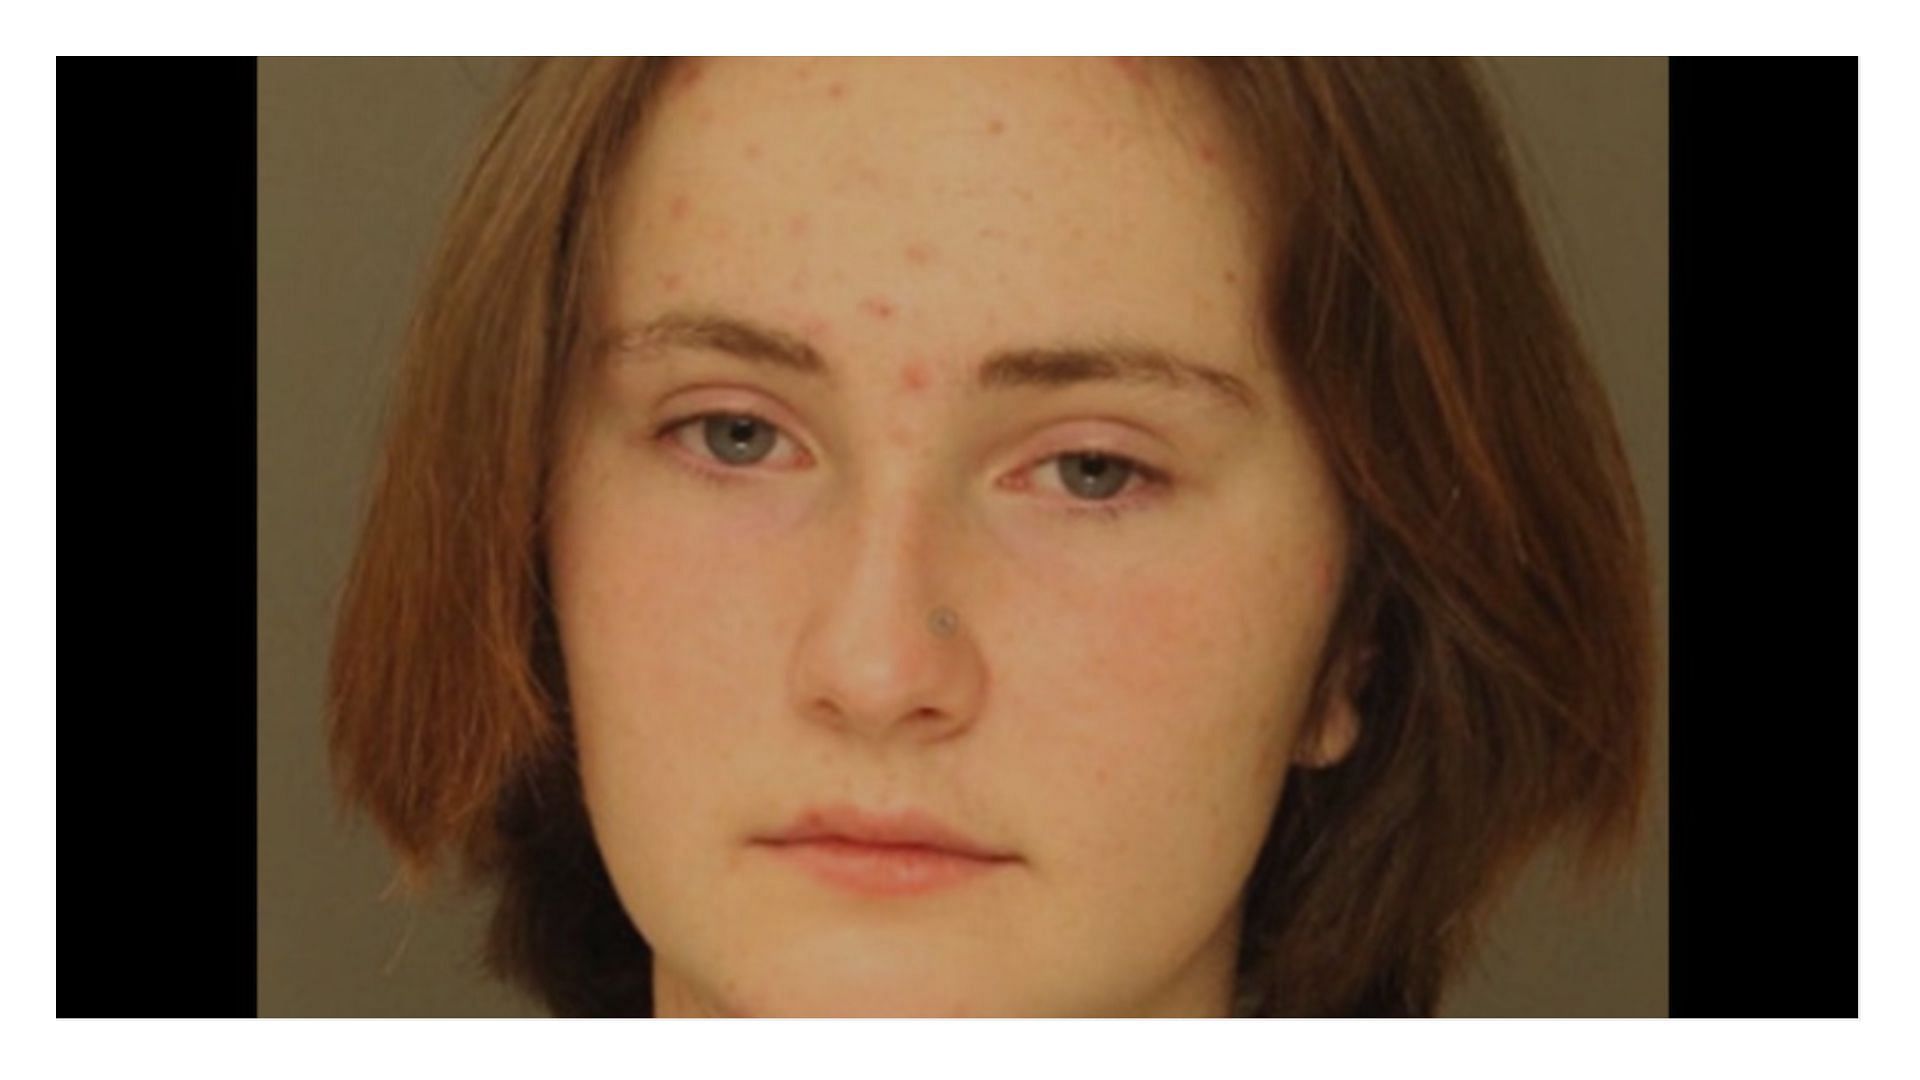 Claire Miller is accused of fatally stabbing her older sister (image via Lancaster County District Attorny)